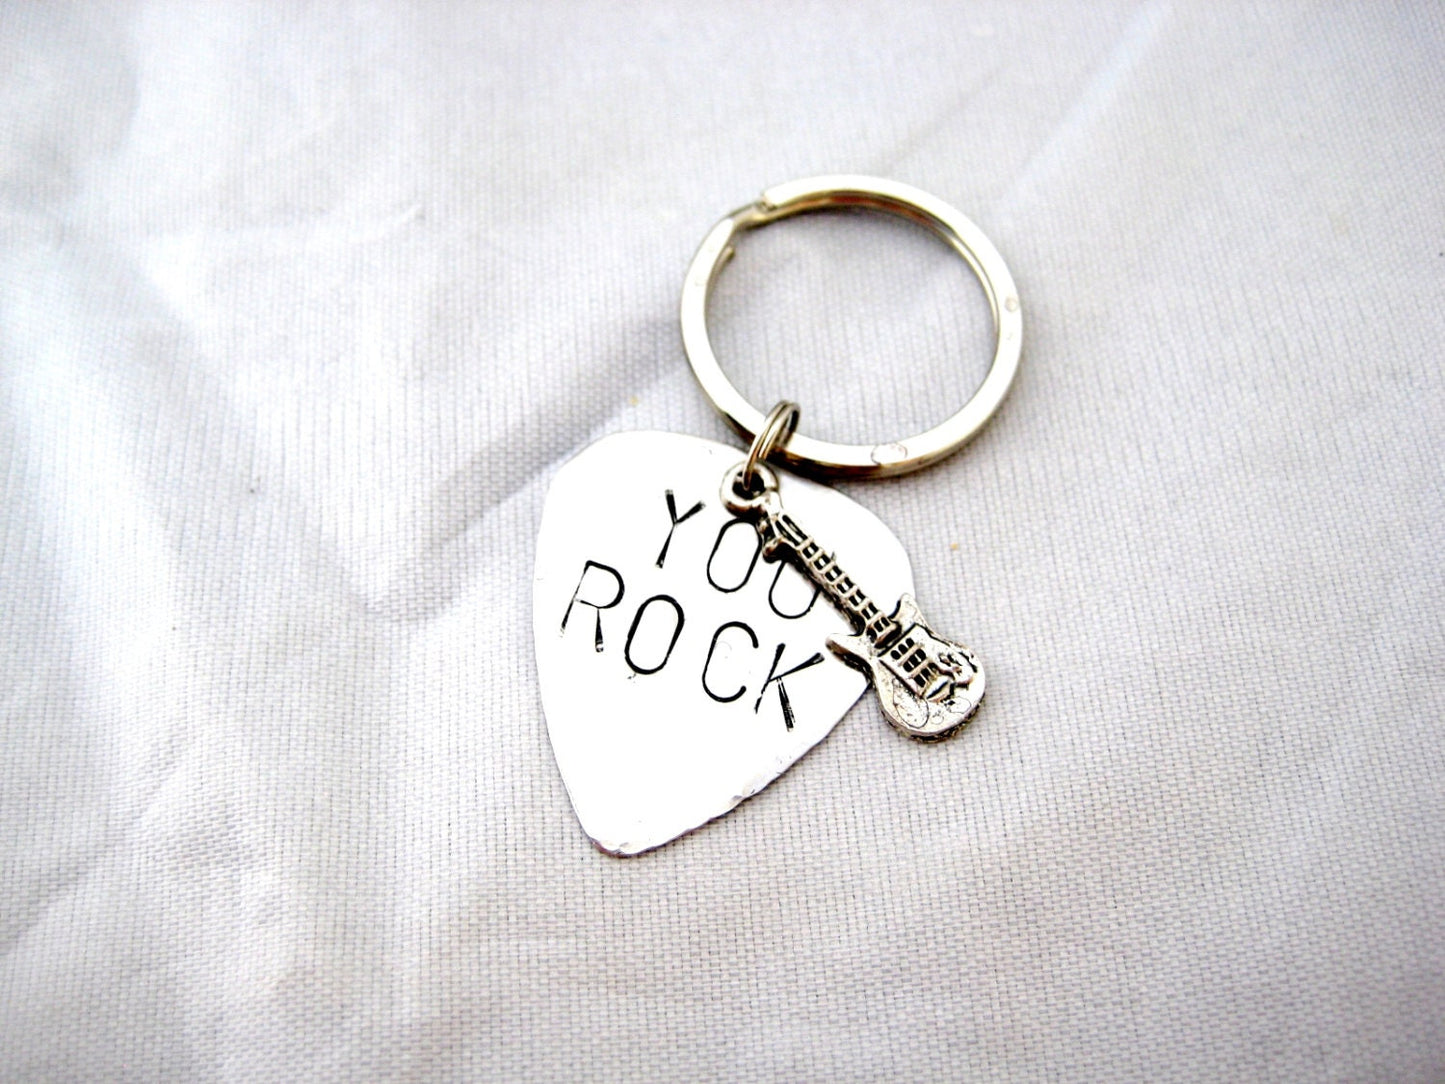 FATHER'S DAY GIFT Guitar Pick, Keychain with Guitar Charm, boyfriend gift, Father's Day Keychain, Music Gift for Him, Custom Keychain